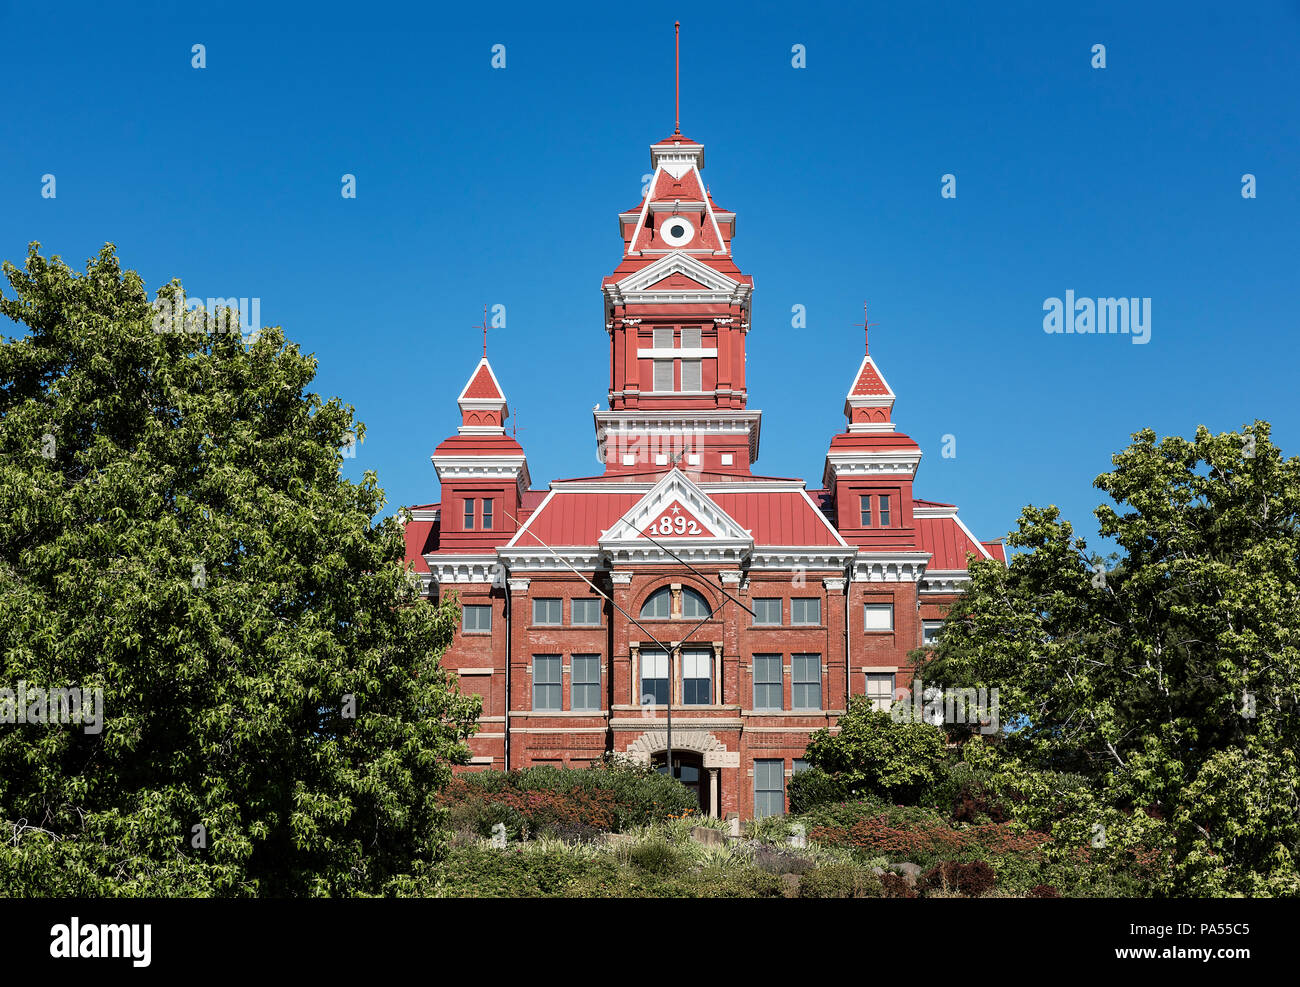 Old City Hall building, currently the Whatcom County Museum, Bellingham, Washington State, USA. Stock Photo